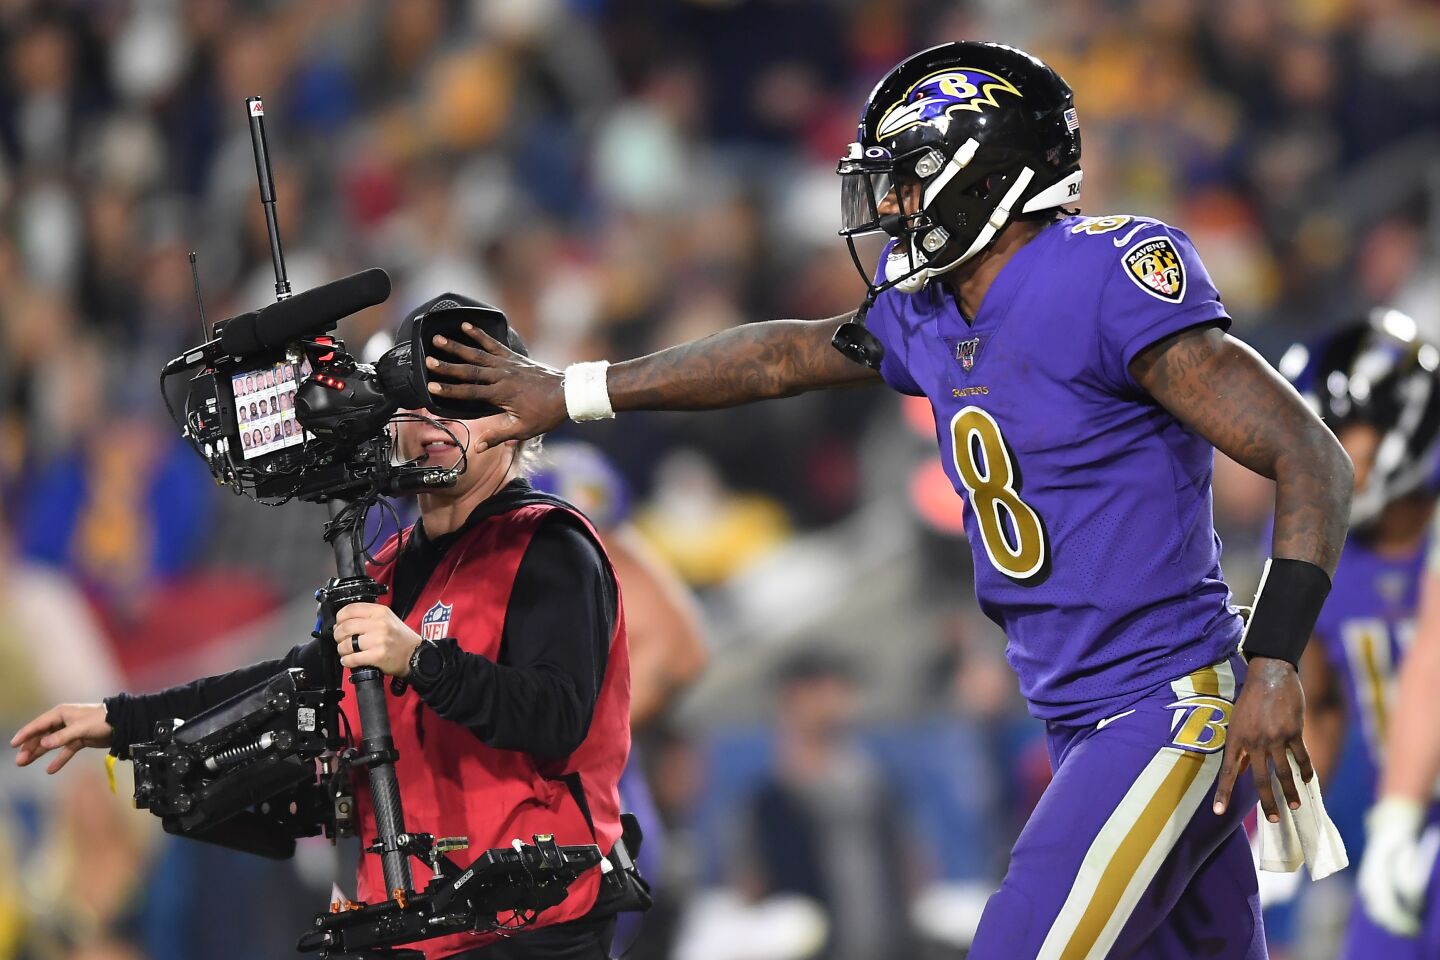 Lamar Jackson covers the lens of a television cameraman after a Ravens touchdown against the Rams during the fourth quarter of a game Nov. 25 at the Coliseum.